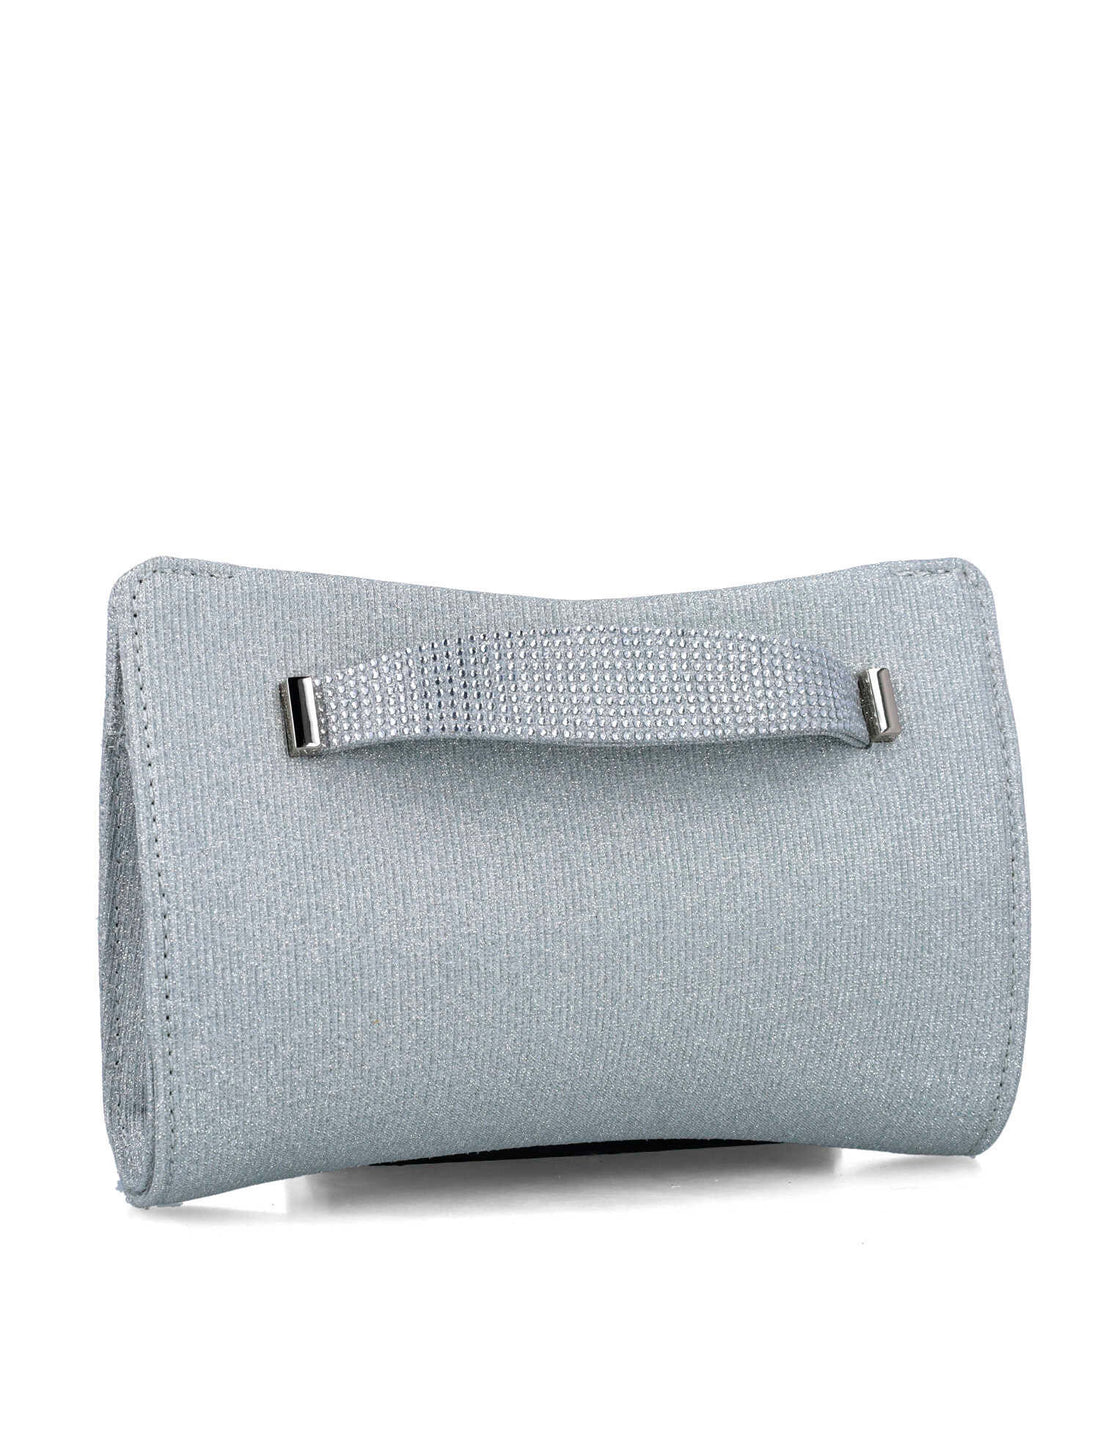 Silver Clutch With Hand Strap_85510_09_02